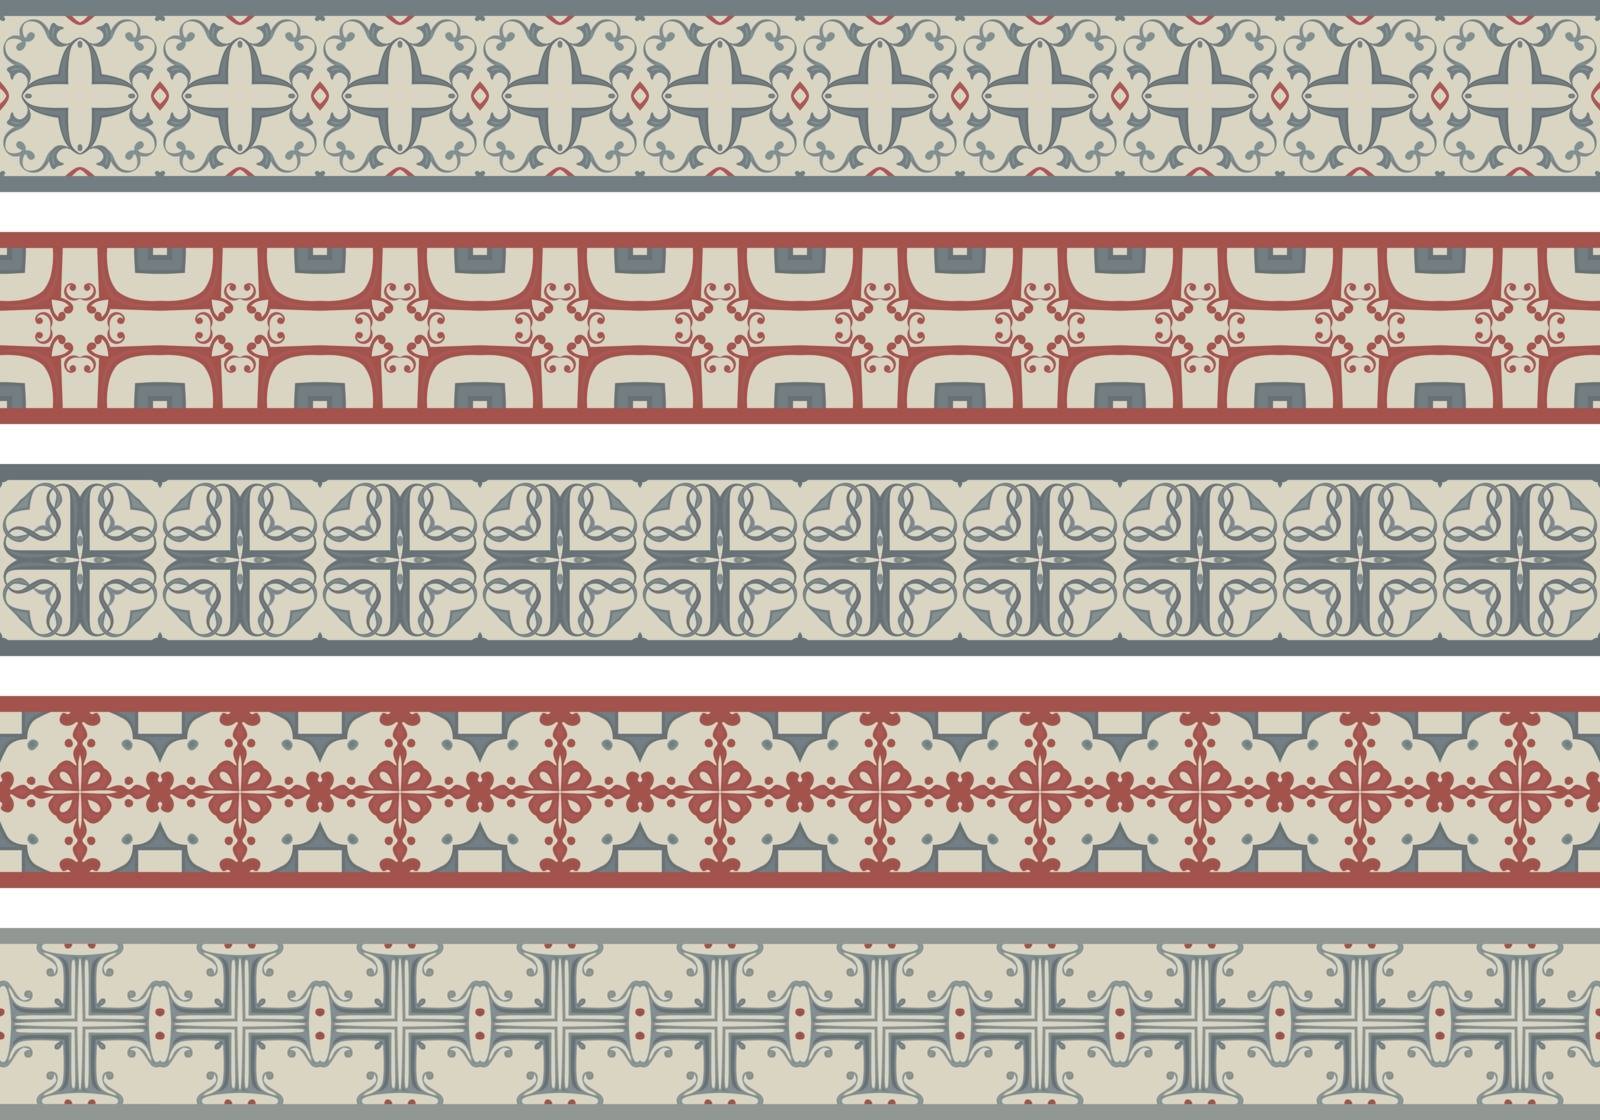 Set of five illustrated decorative borders made of abstract elements in beige, gray and red